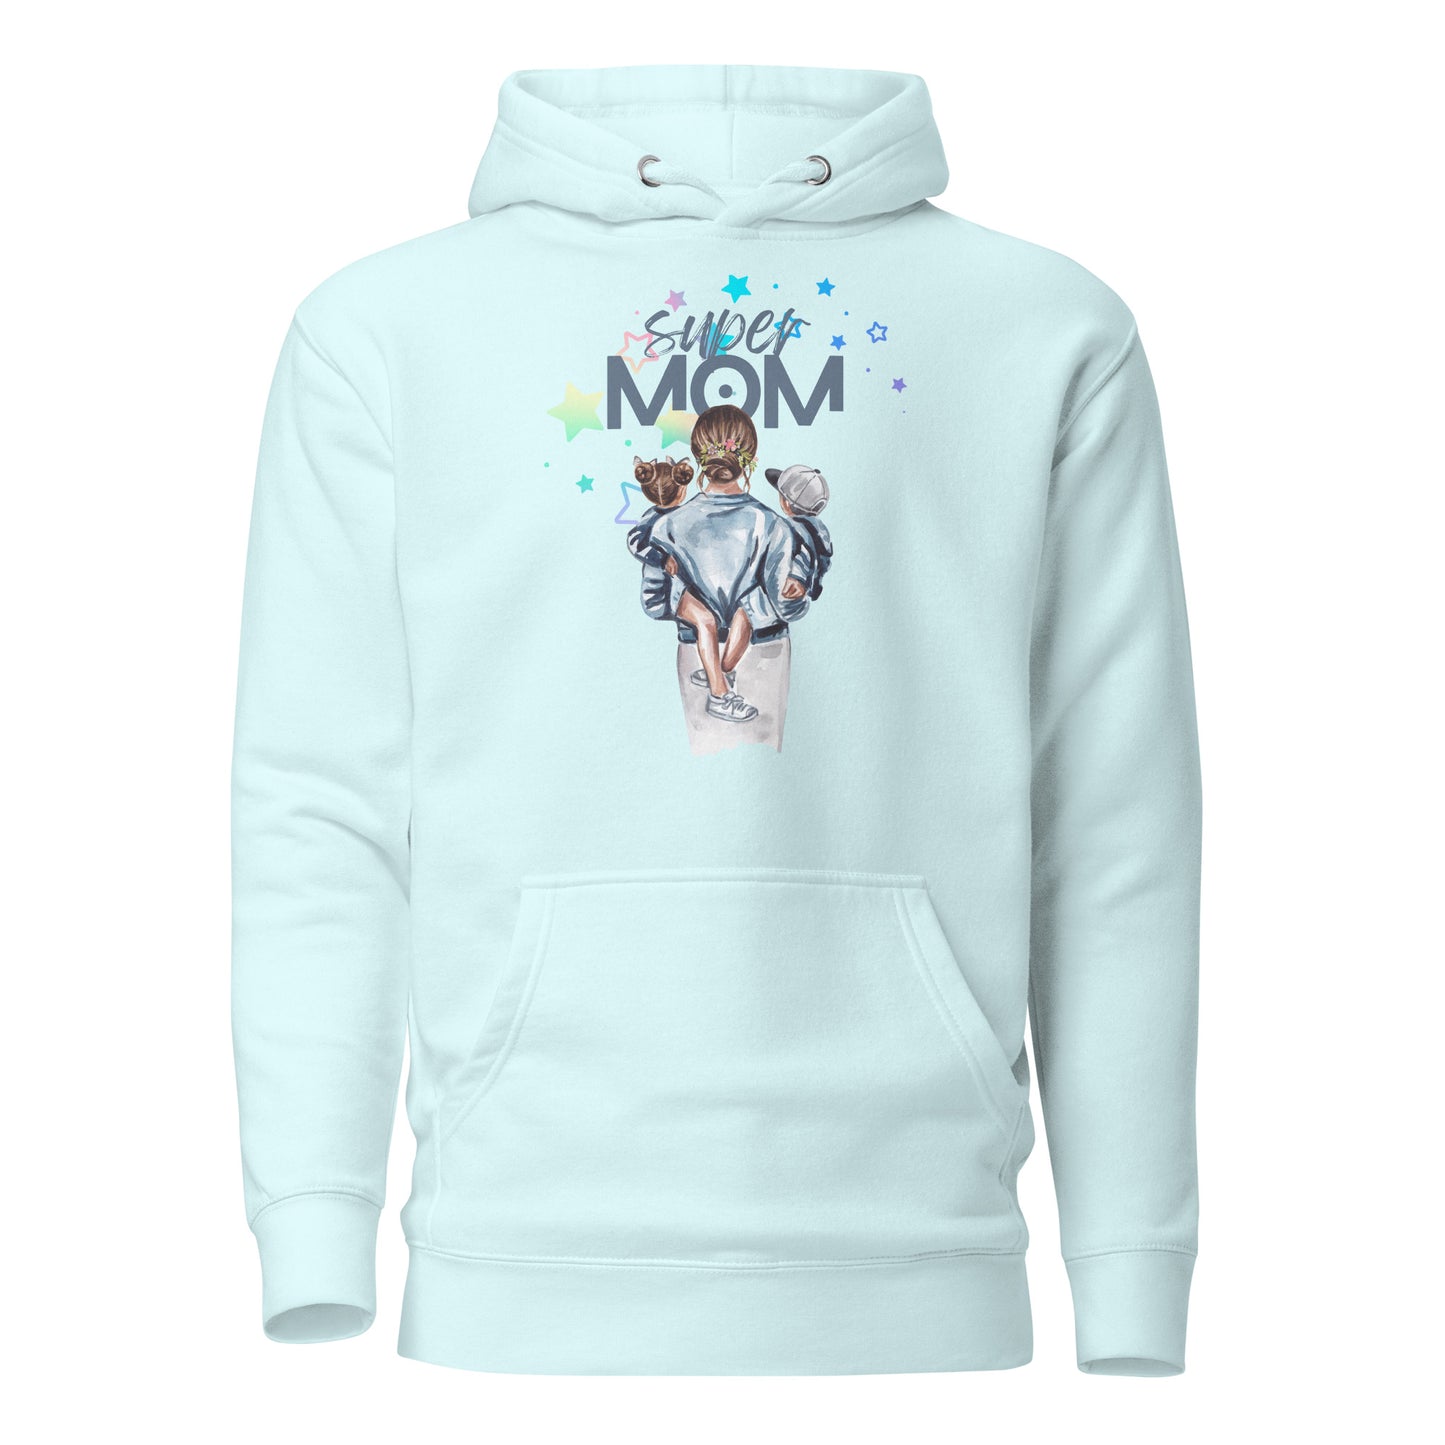 Super Mom With Kids Unisex Hoodie, Gifts for Moms, Mother's Day Gifts, Gifts for Mothers